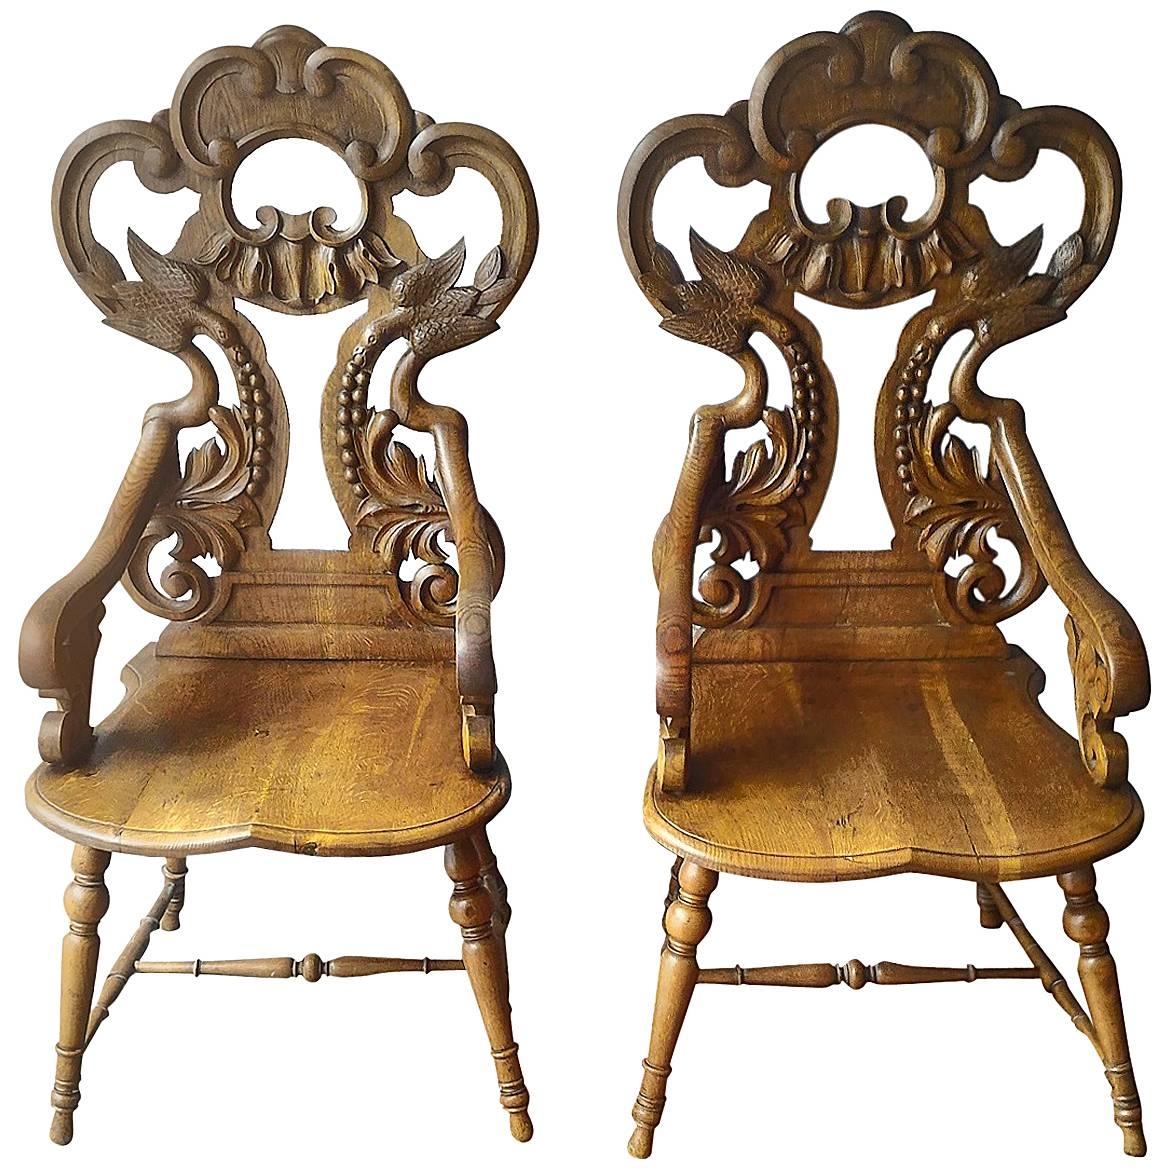 19th Century Baroque Revival Carved Wood Chairs